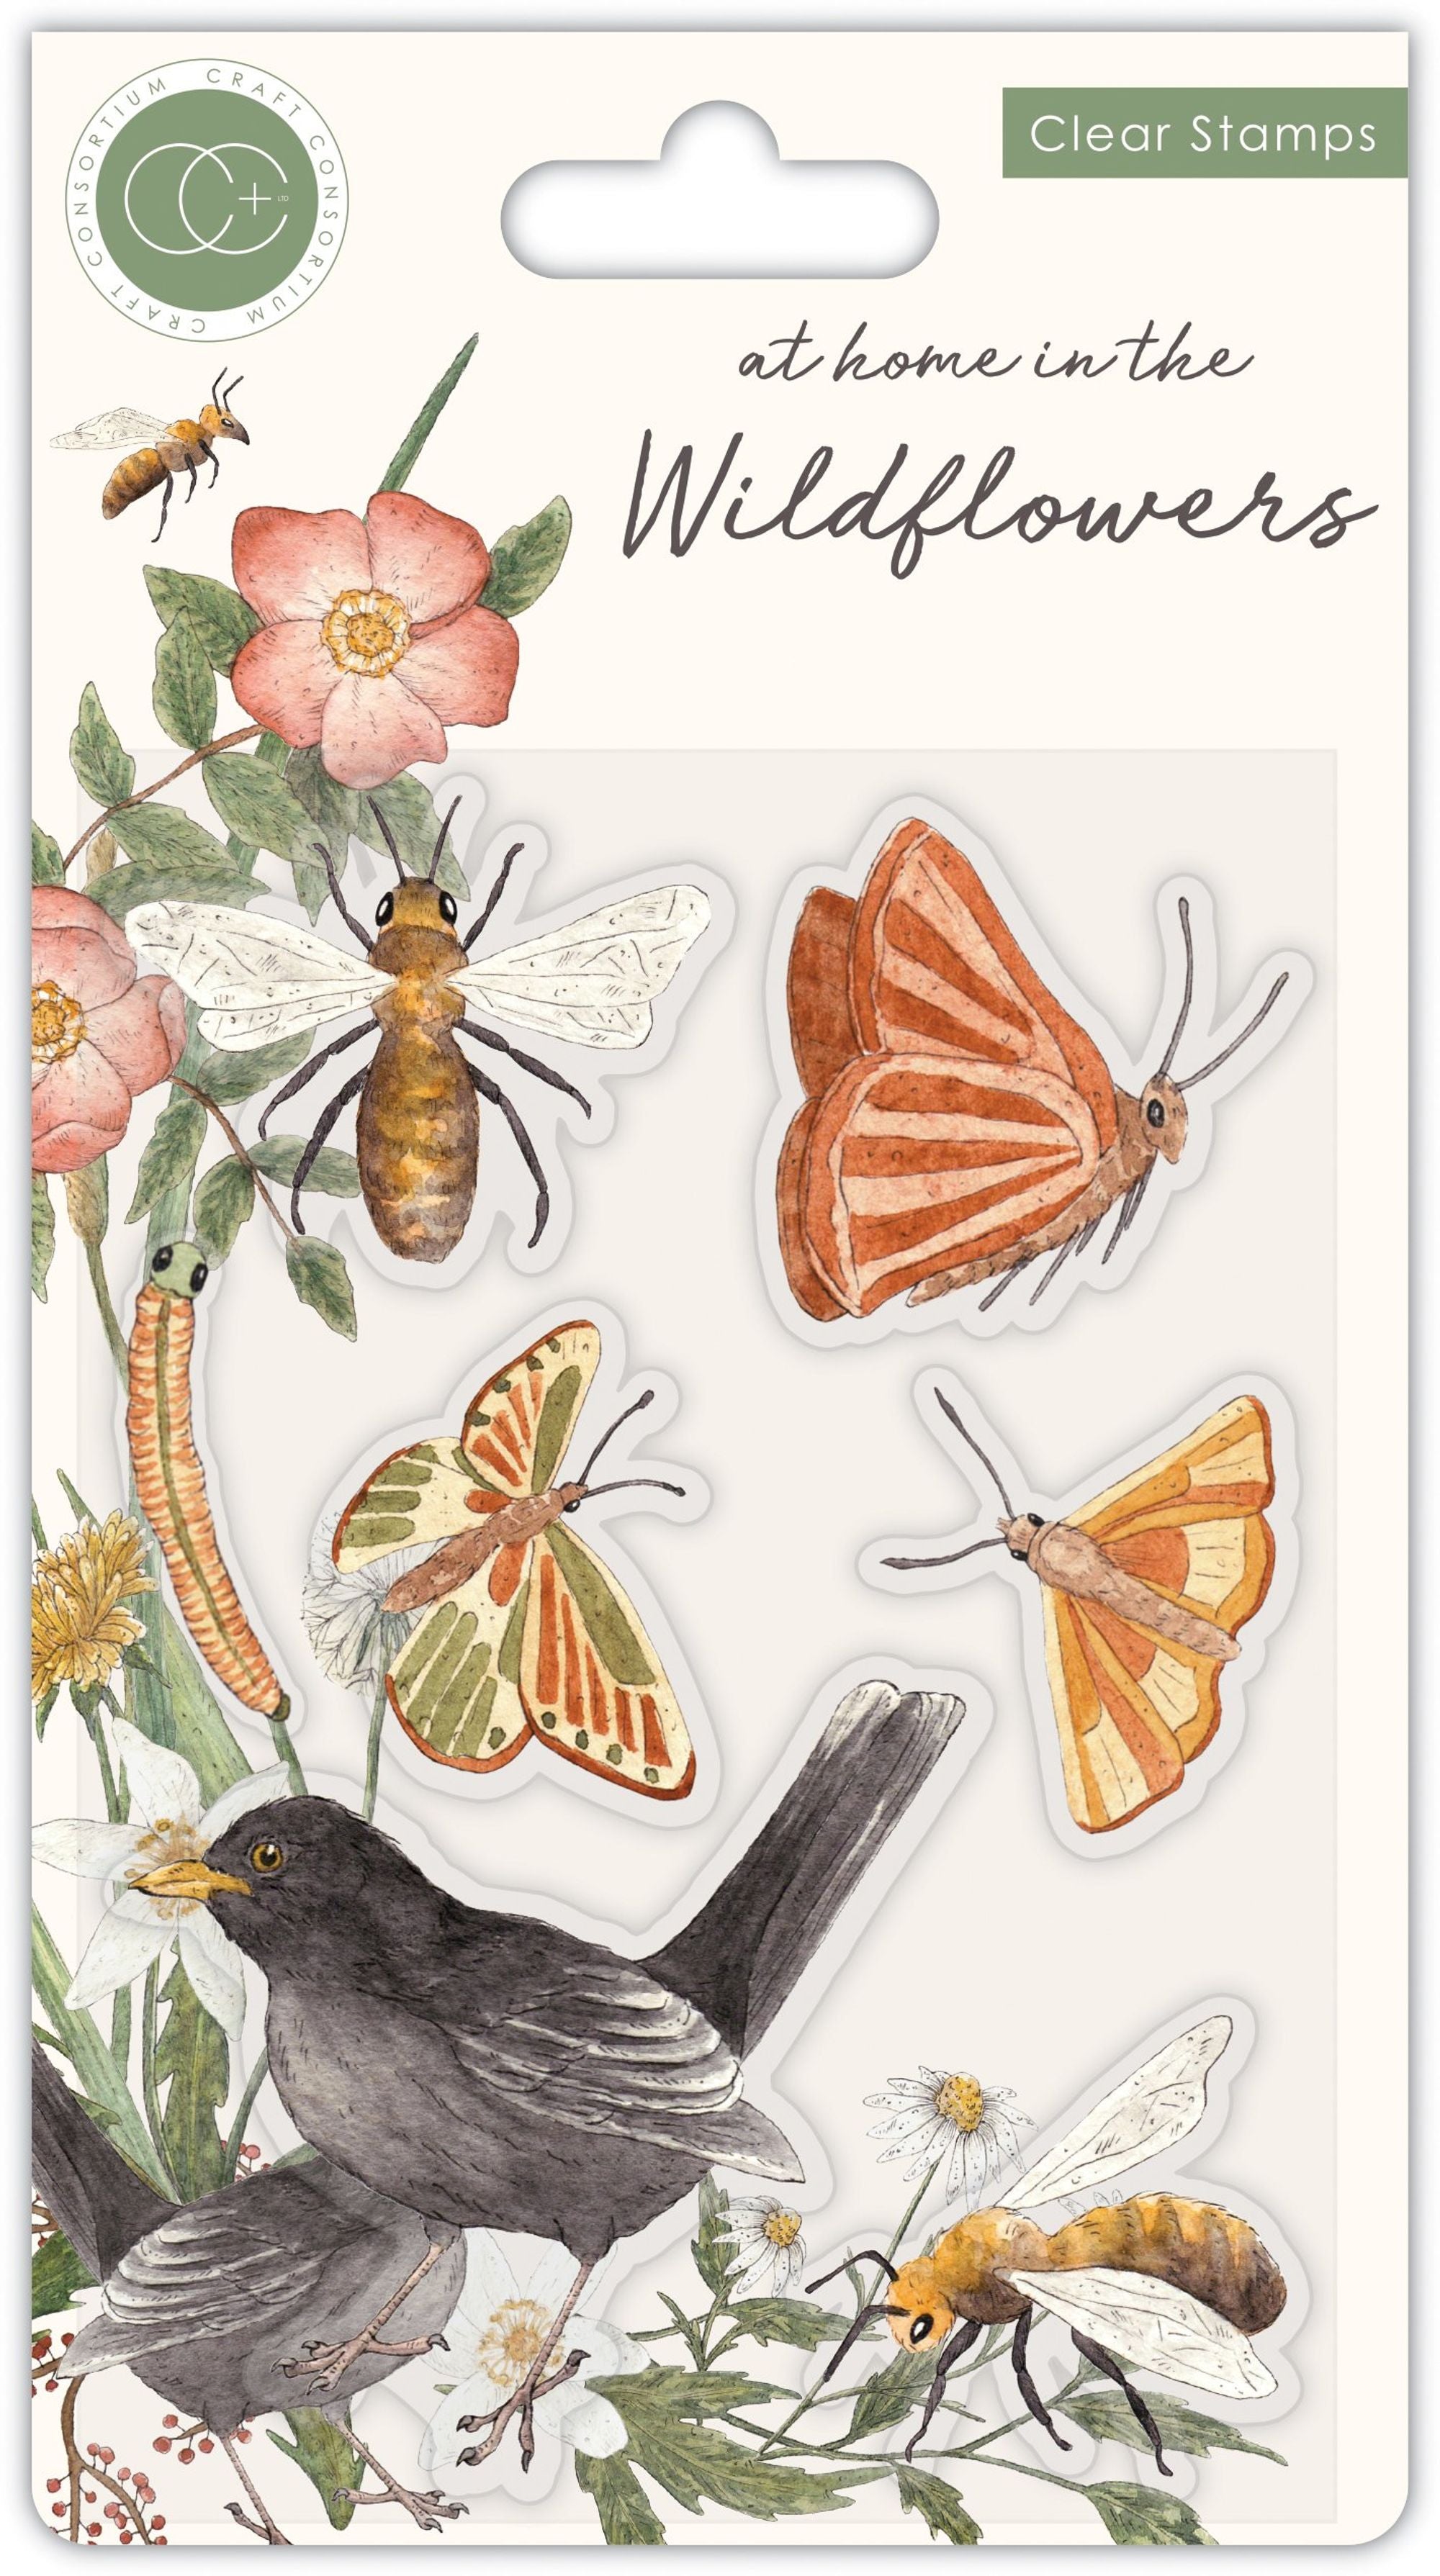 At home in the wildflowers - Stamp Set - Bees & Butterflies